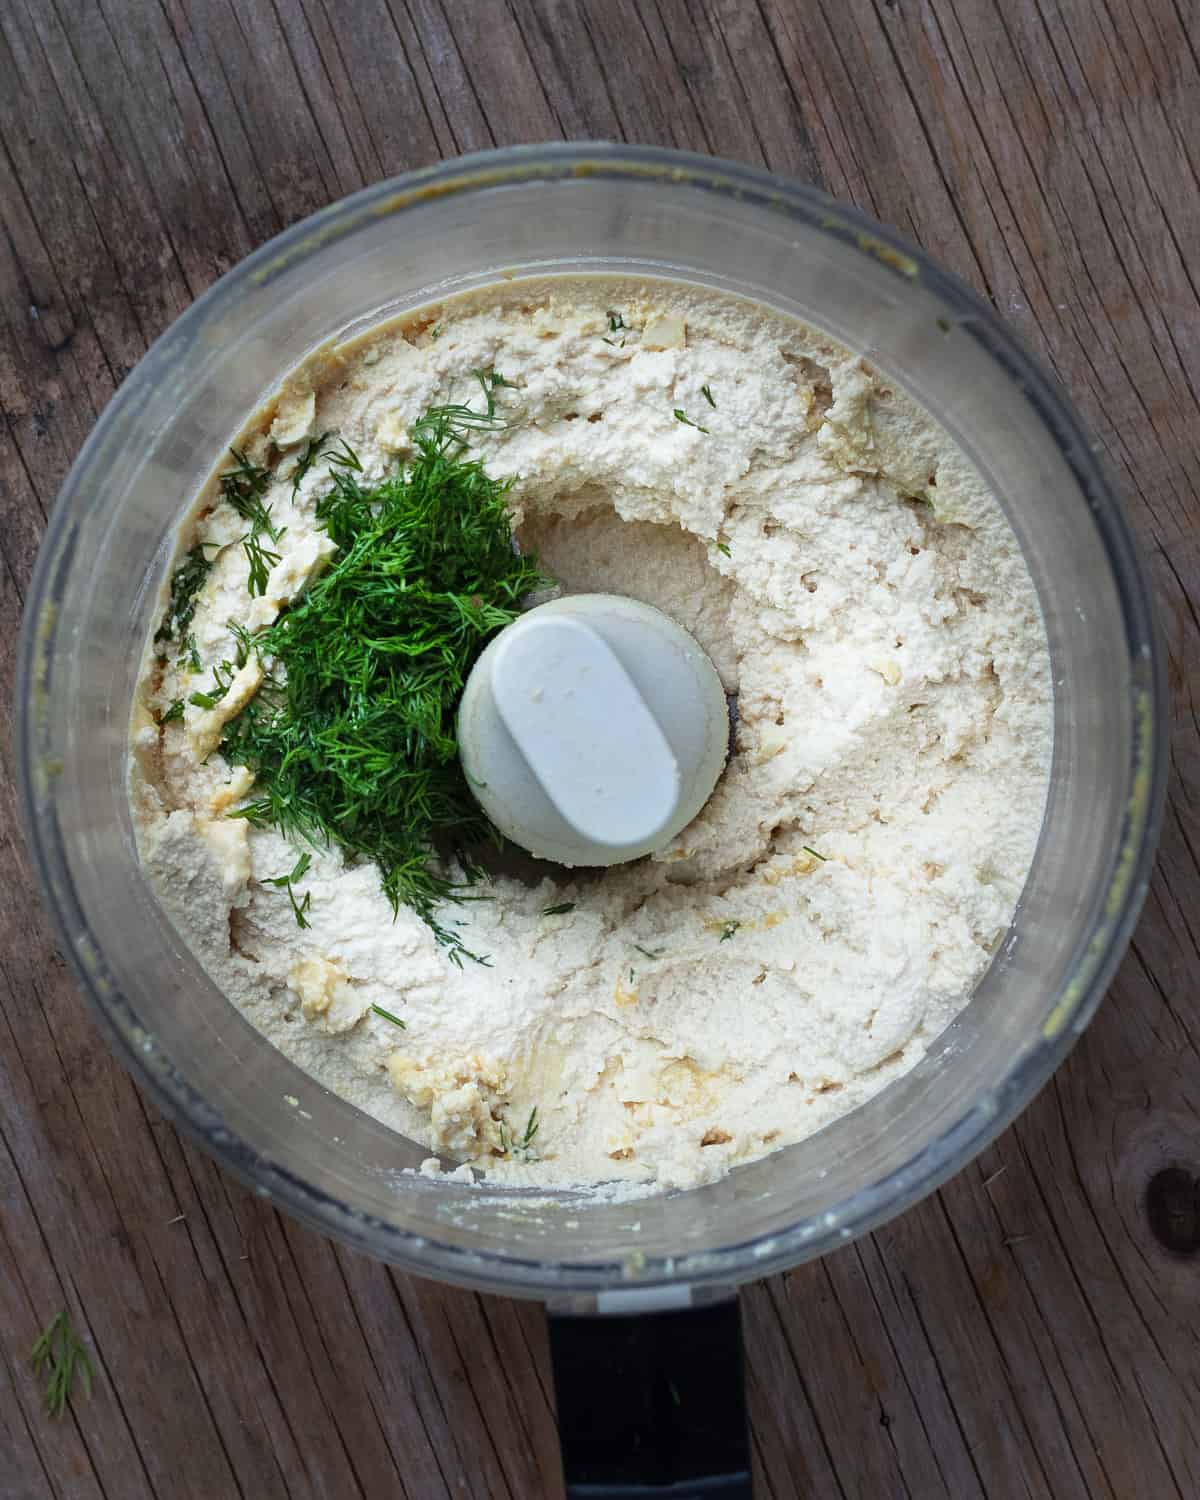 Overhead shot of a food processor on a wooden table with tofu, spices and, and parsley inside that has been processed into a vegan cheese